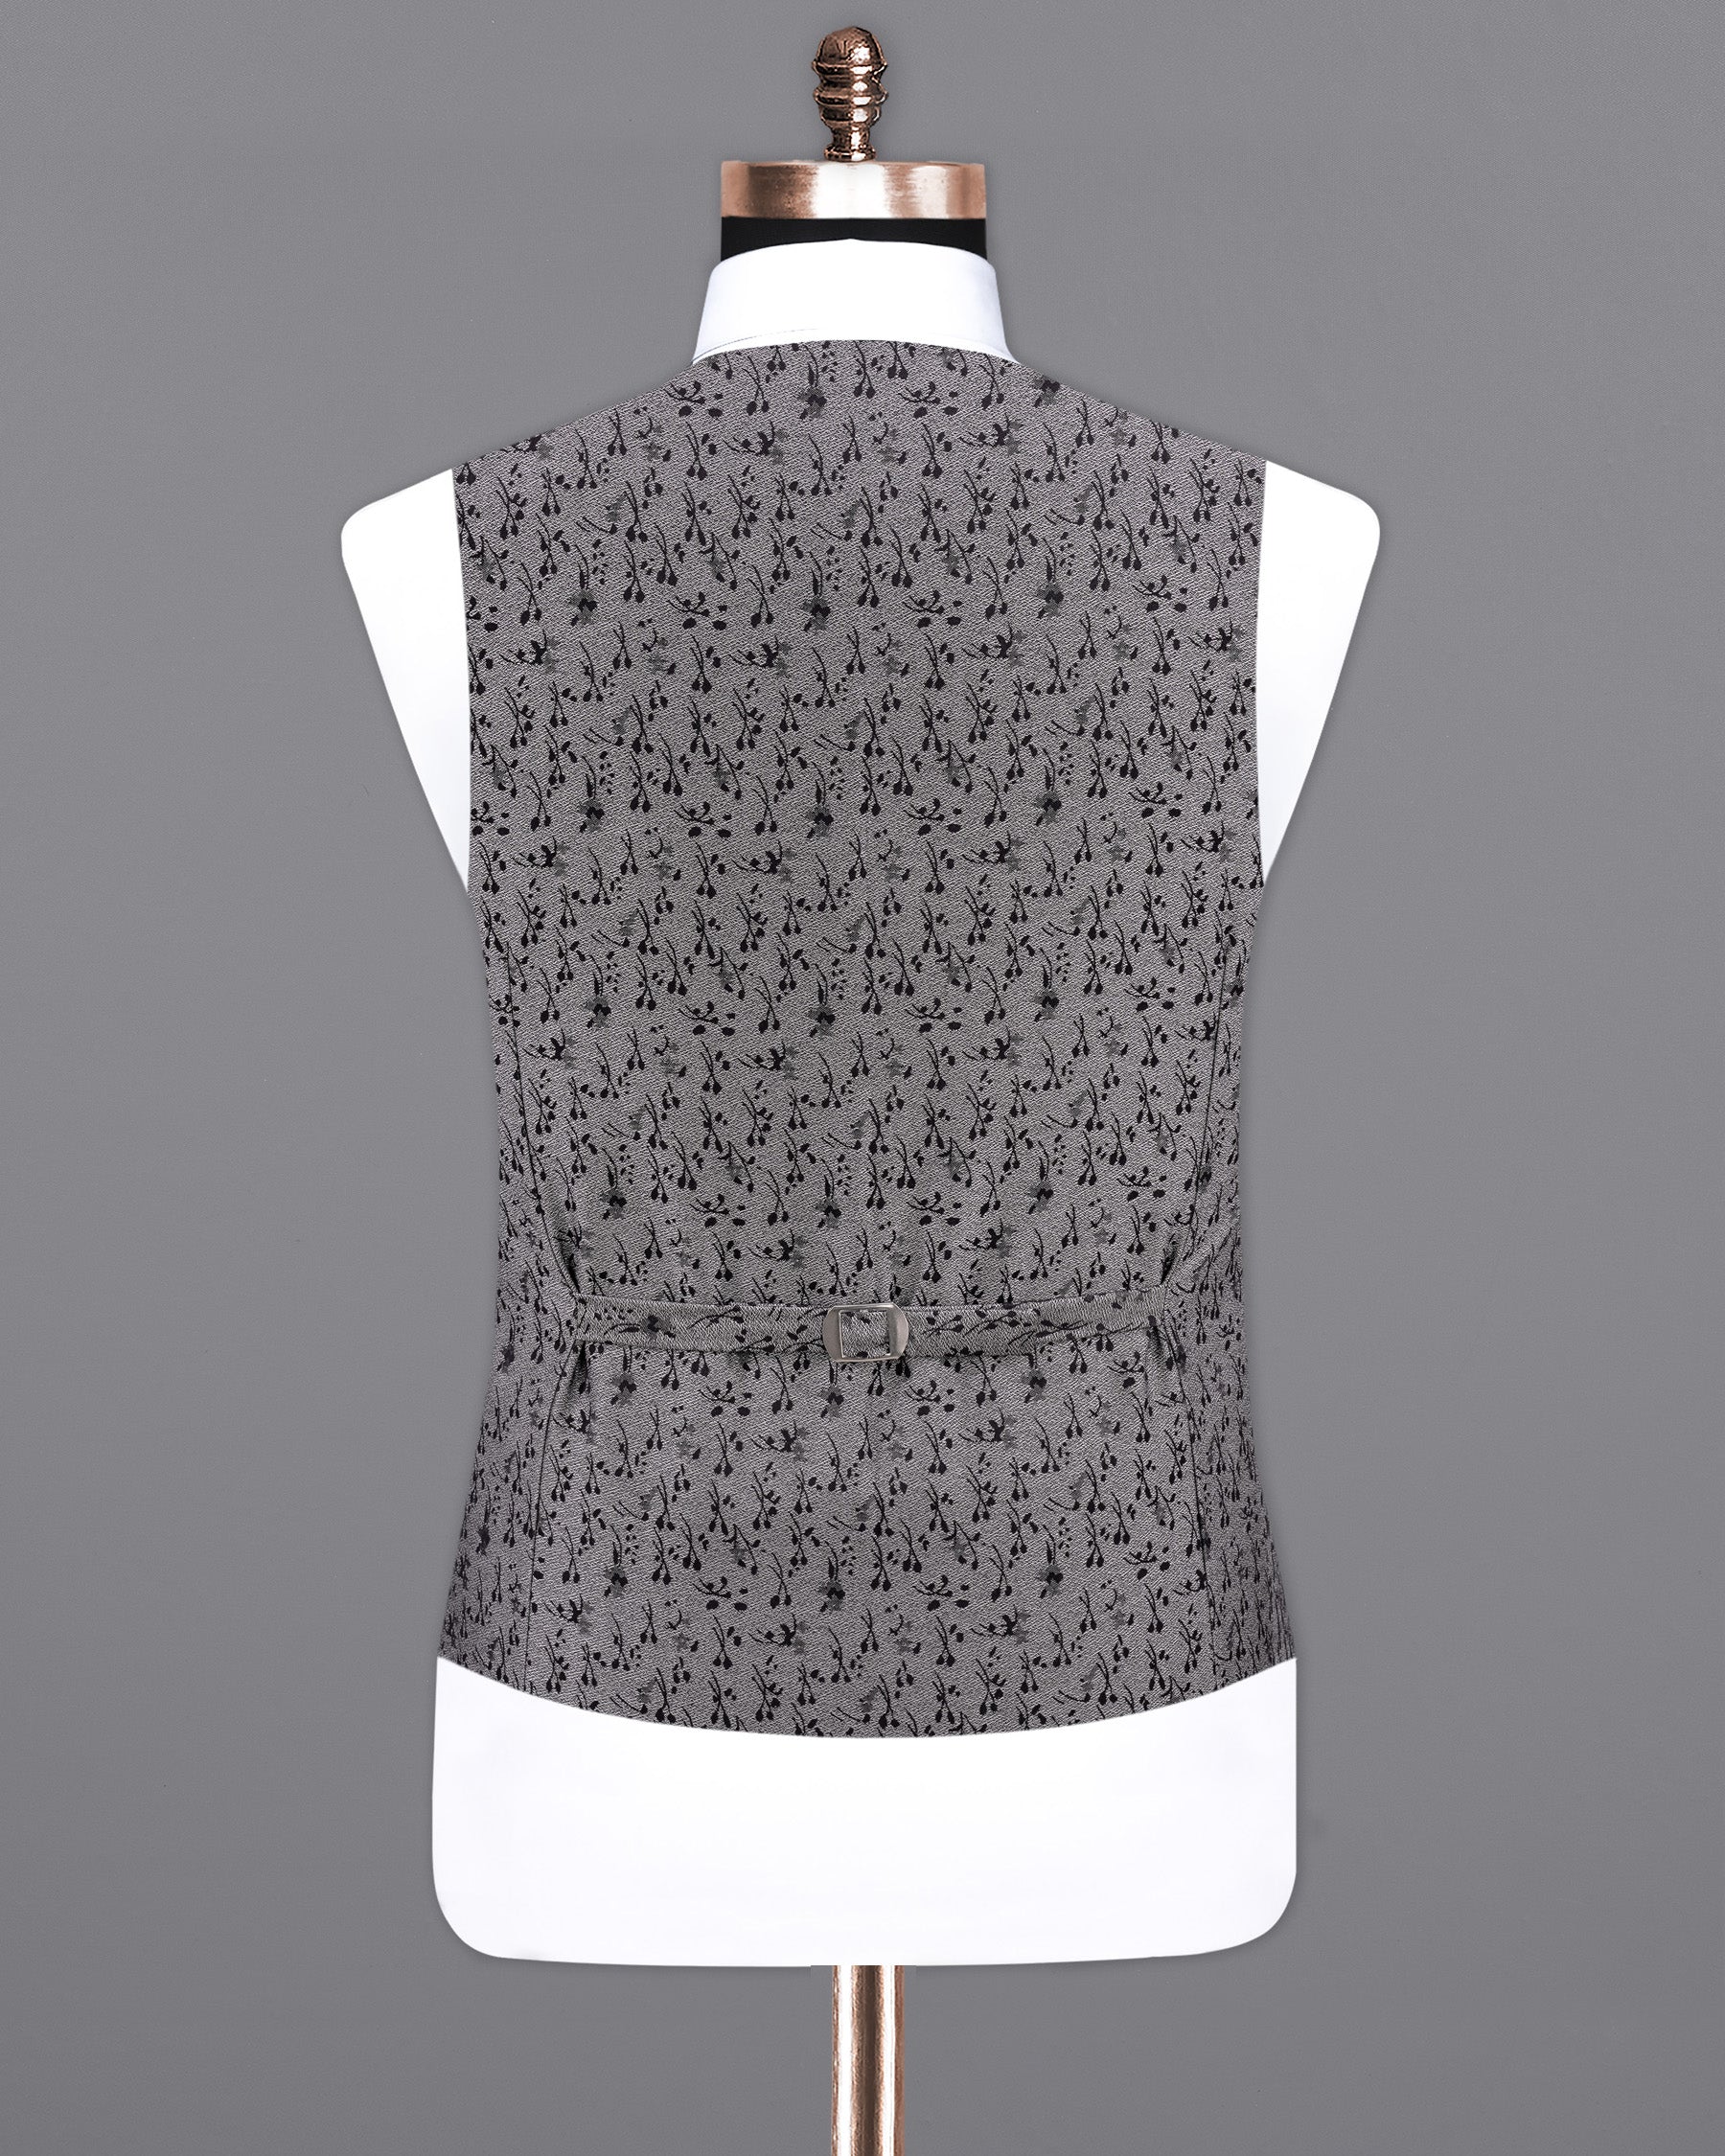 Flint Silver Ditzy Textured With Jade Black Waistcoat V2102-36, V2102-38, V2102-40, V2102-42, V2102-44, V2102-46, V2102-48, V2102-50, V2102-52, V2102-54, V2102-56, V2102-58, V2102-60